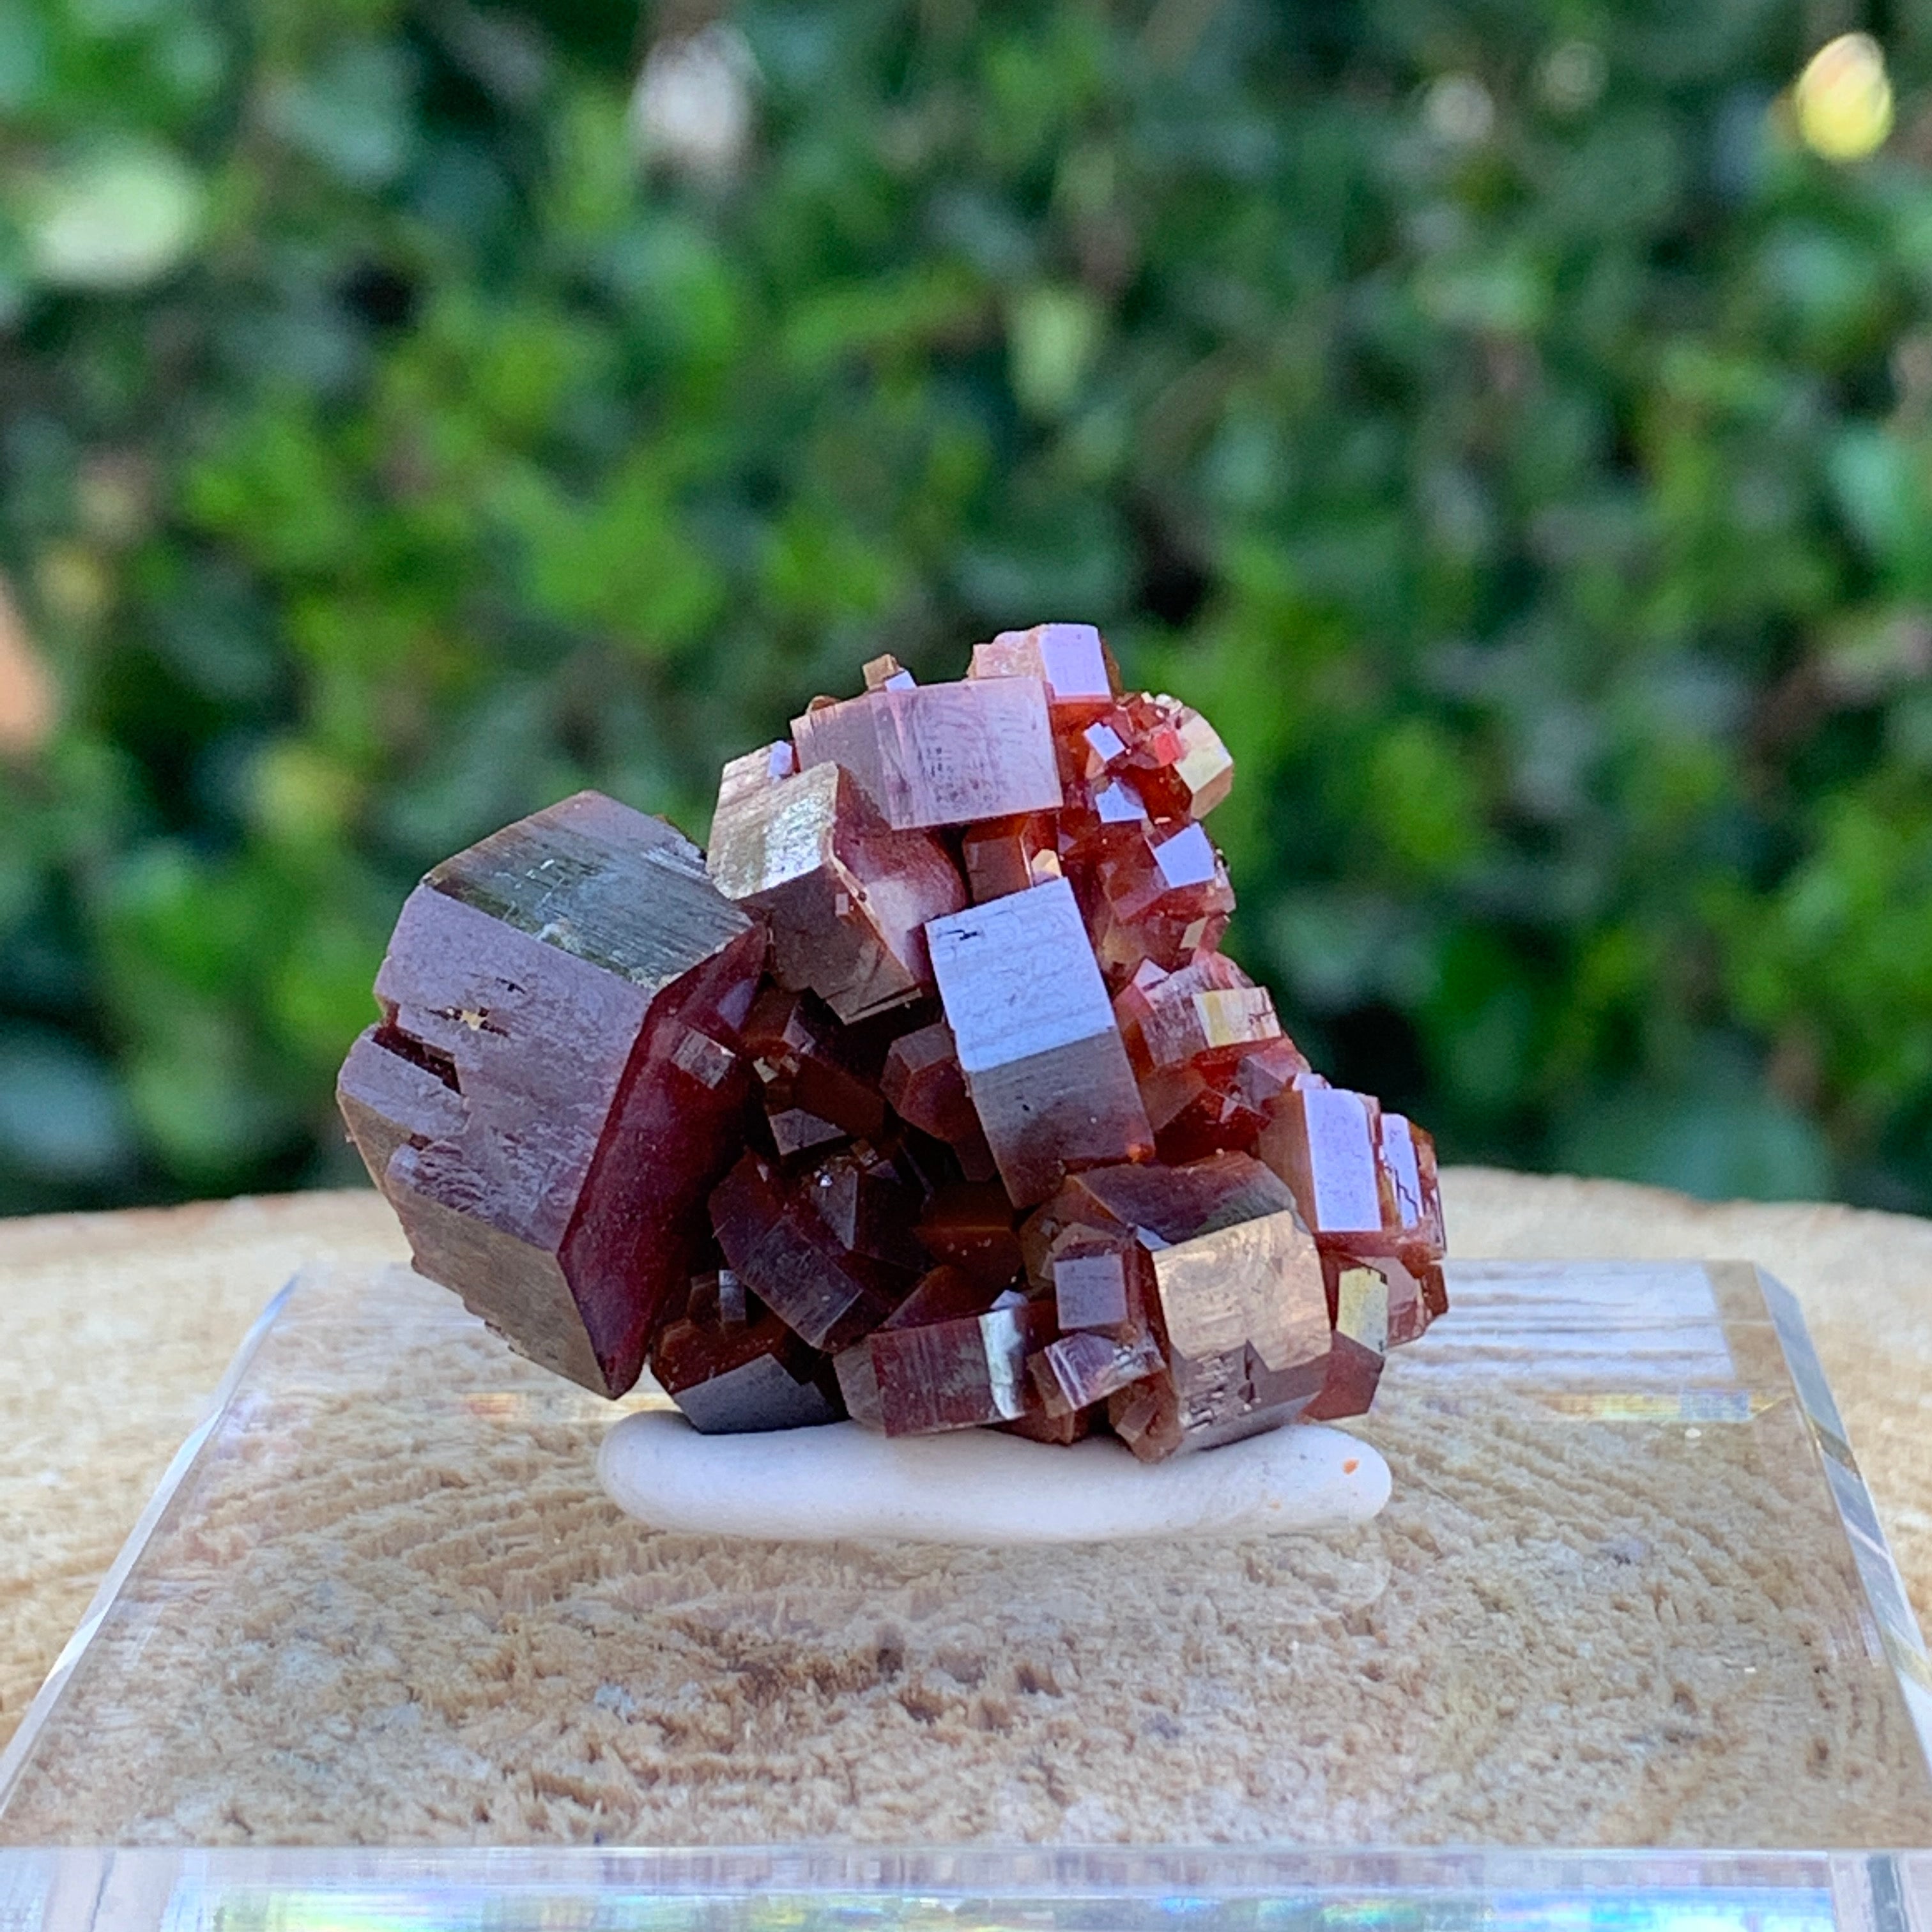 34.5g 3.5x3x1.5cm Red Vanadinite Nugget from Morocco